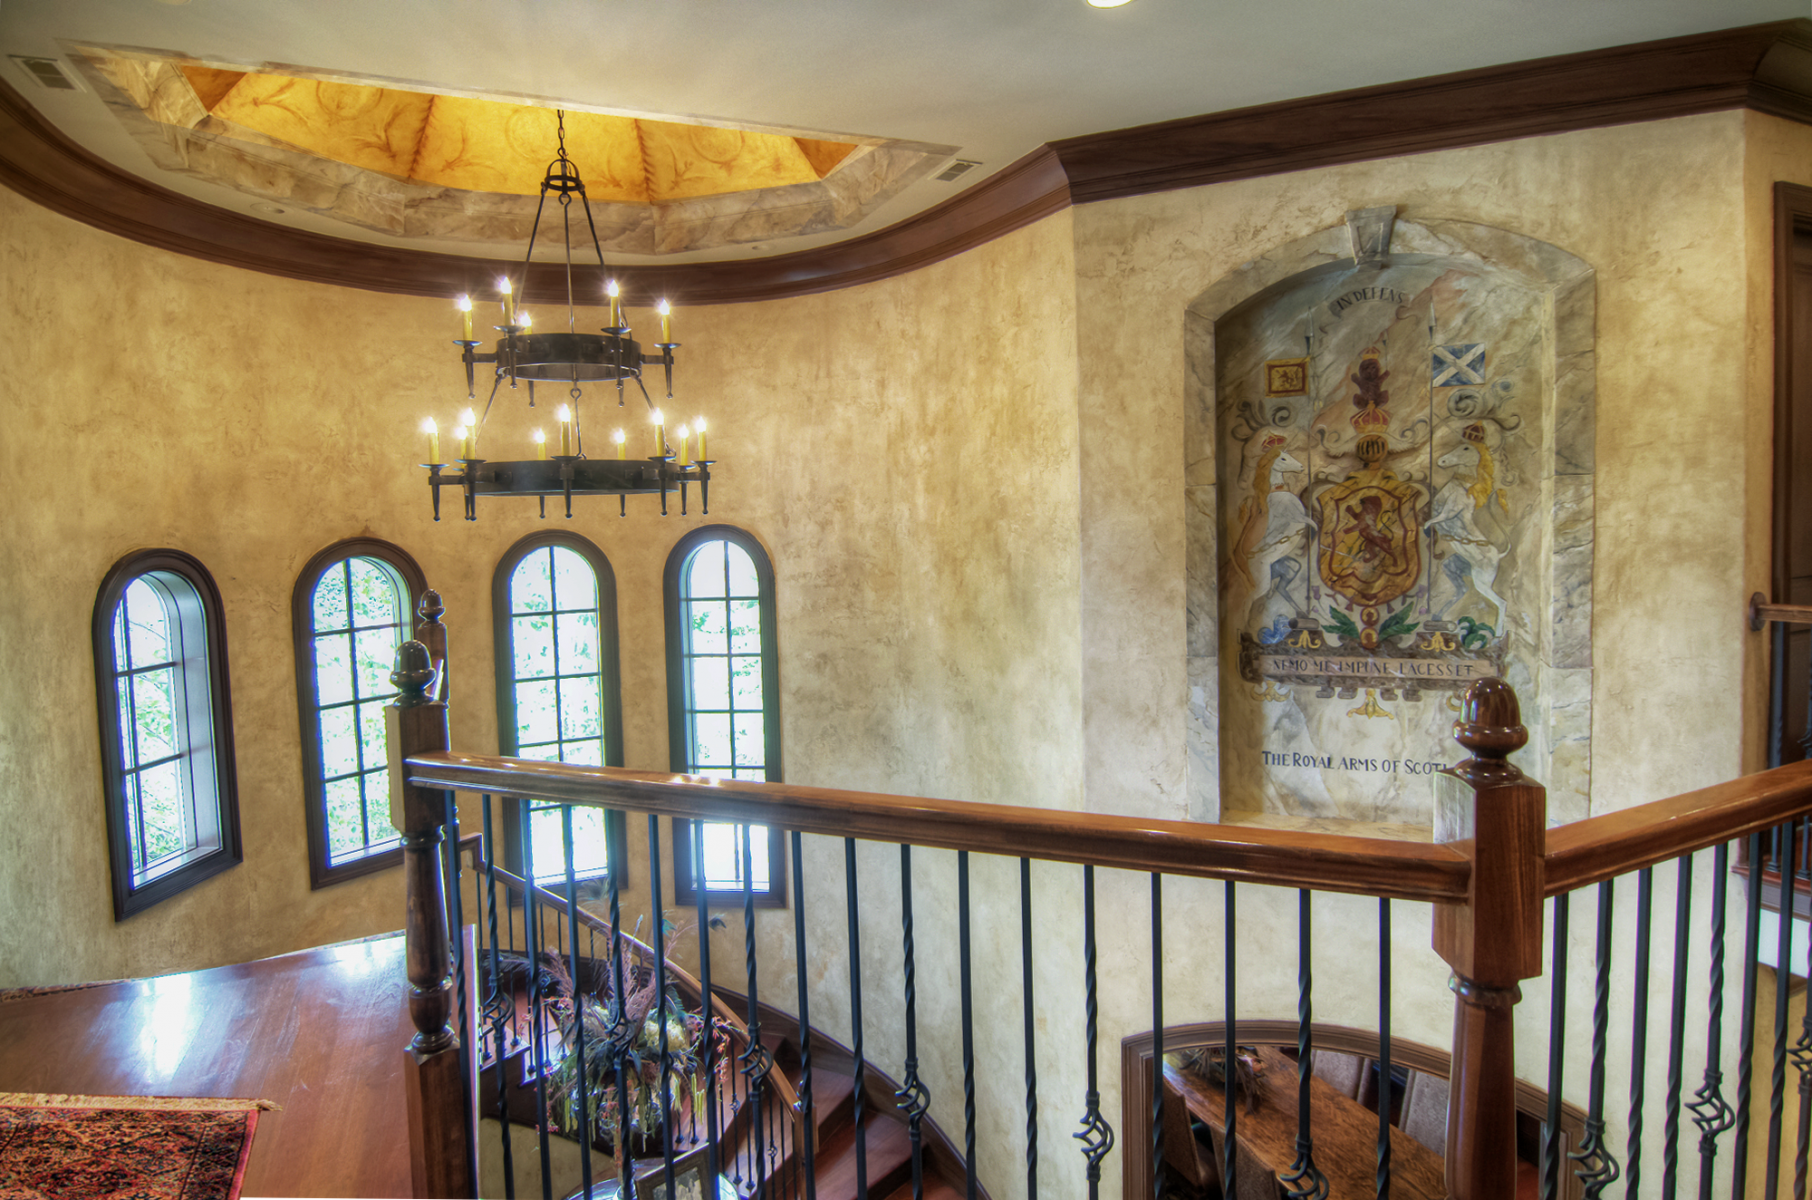 European plaster walls with wood glazed trim custom ceiling mural and marble crest.